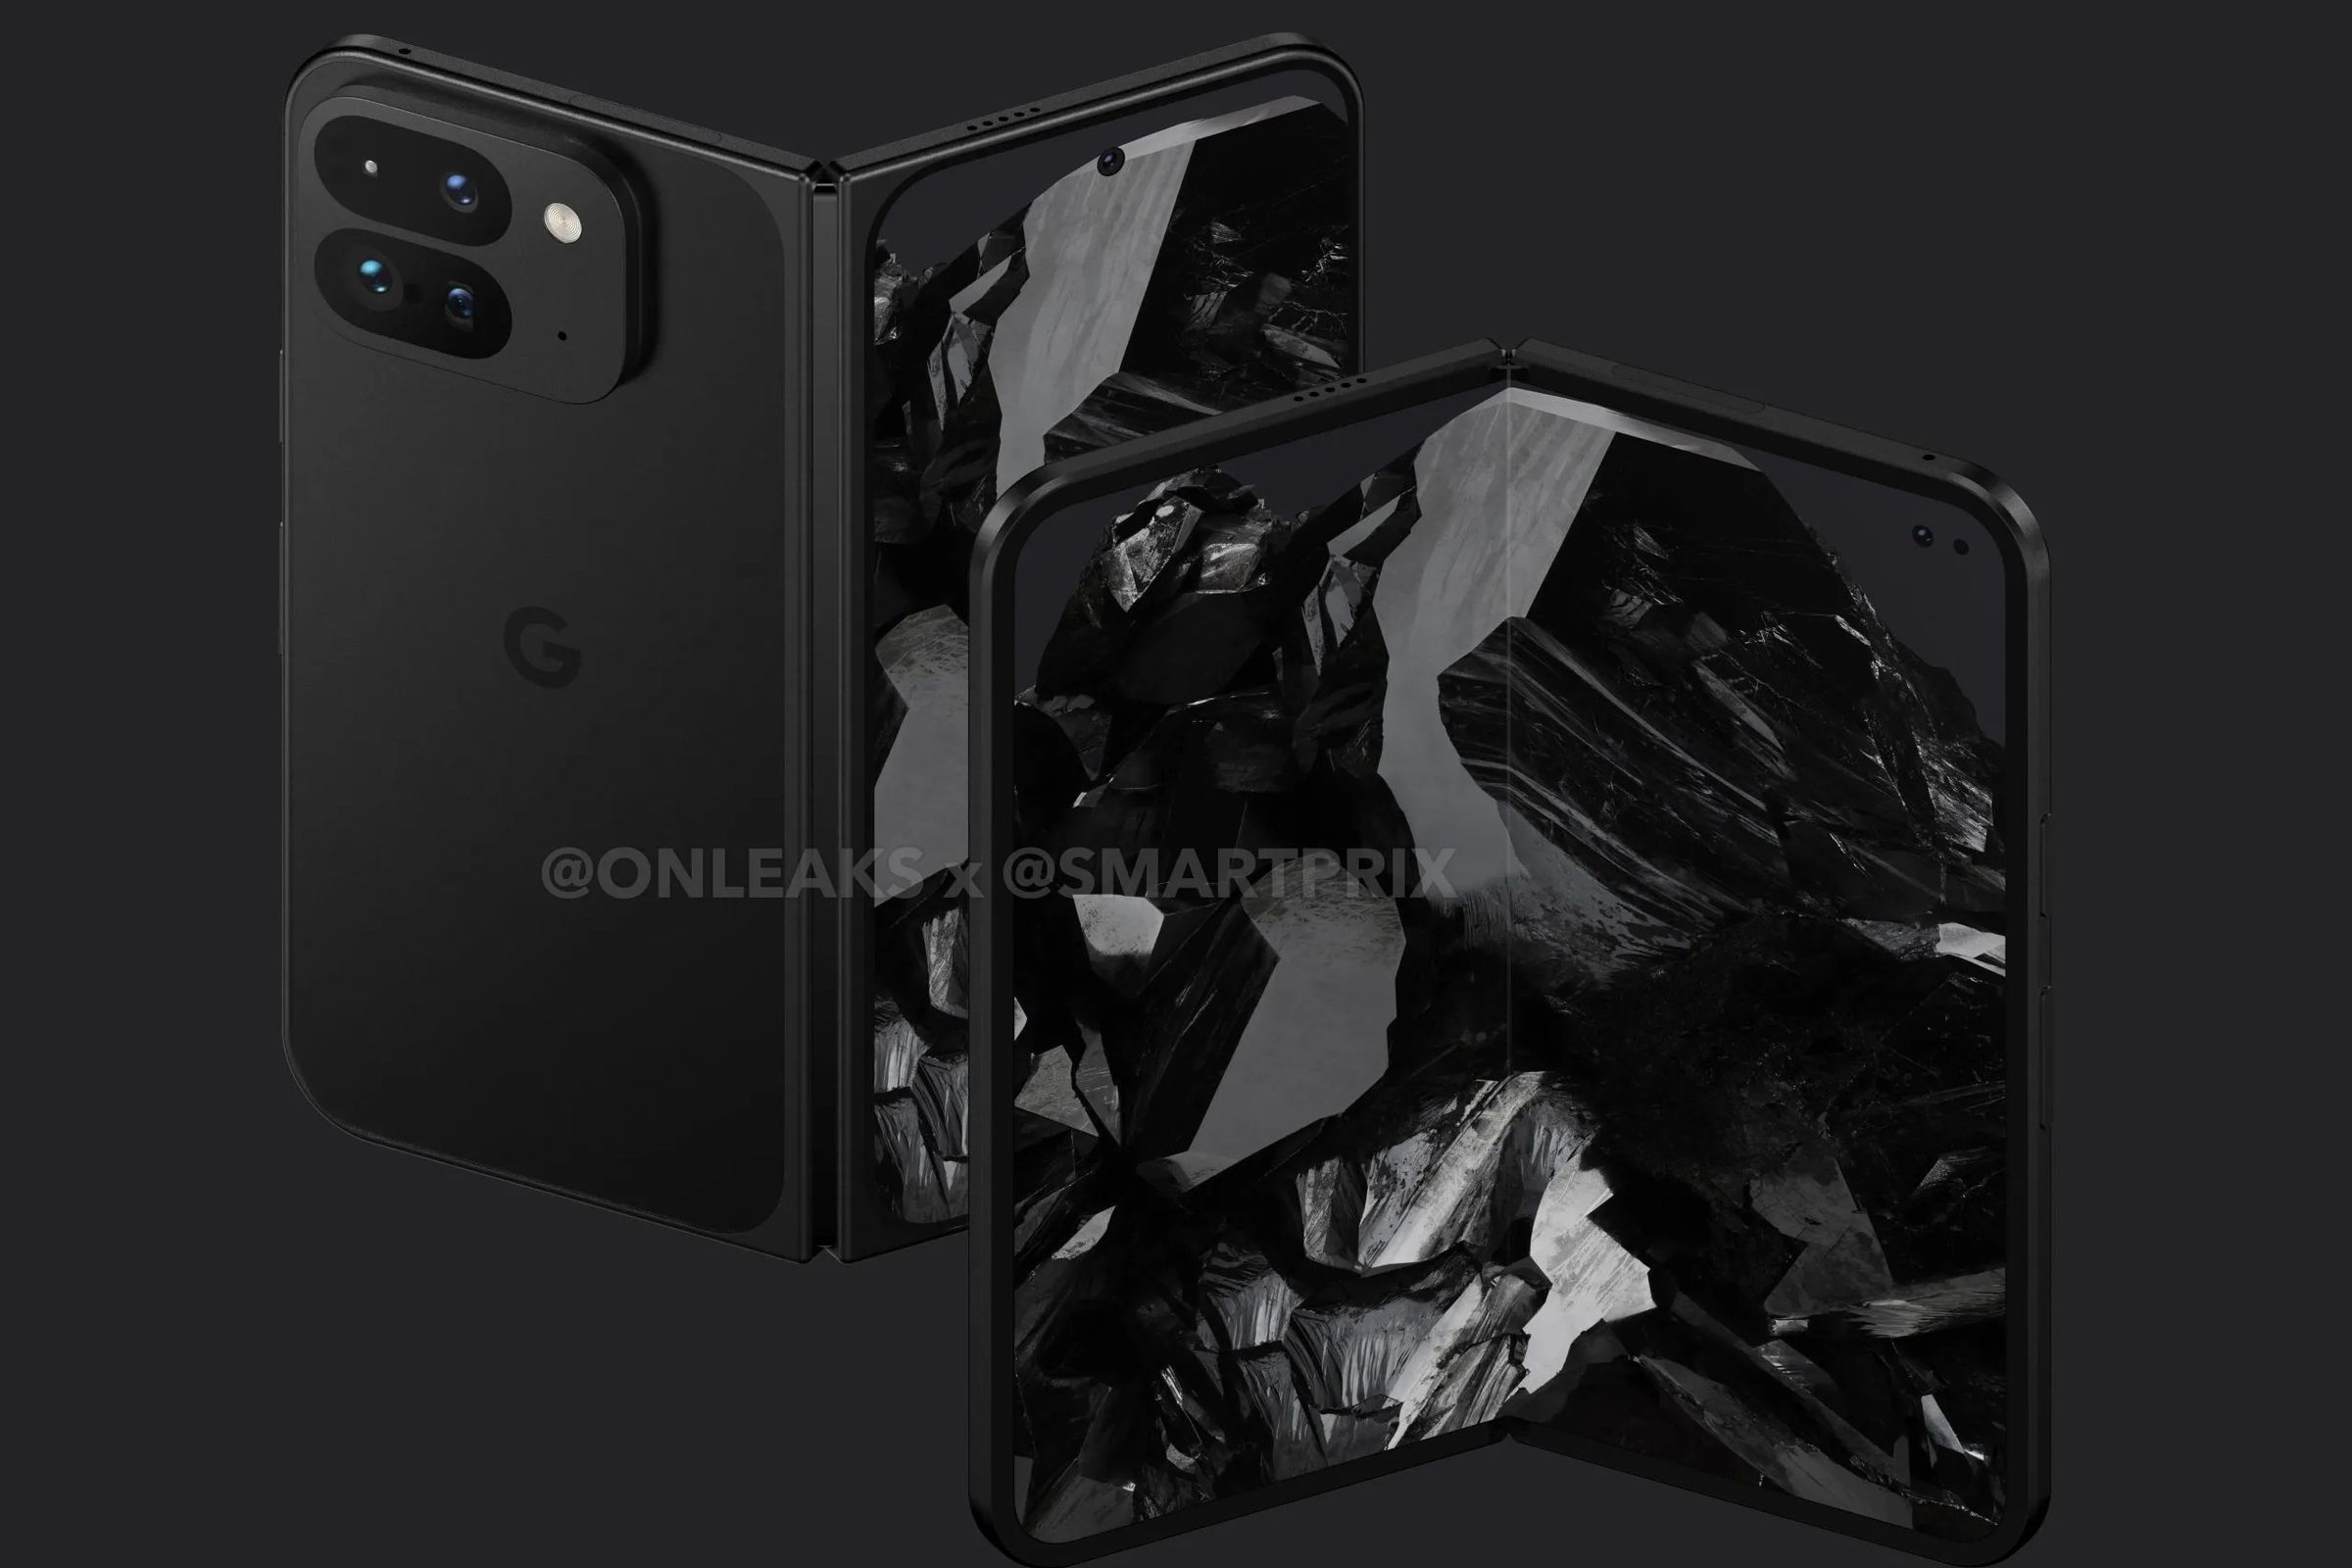 A leaked render that appears to show the Google Pixel Fold 2